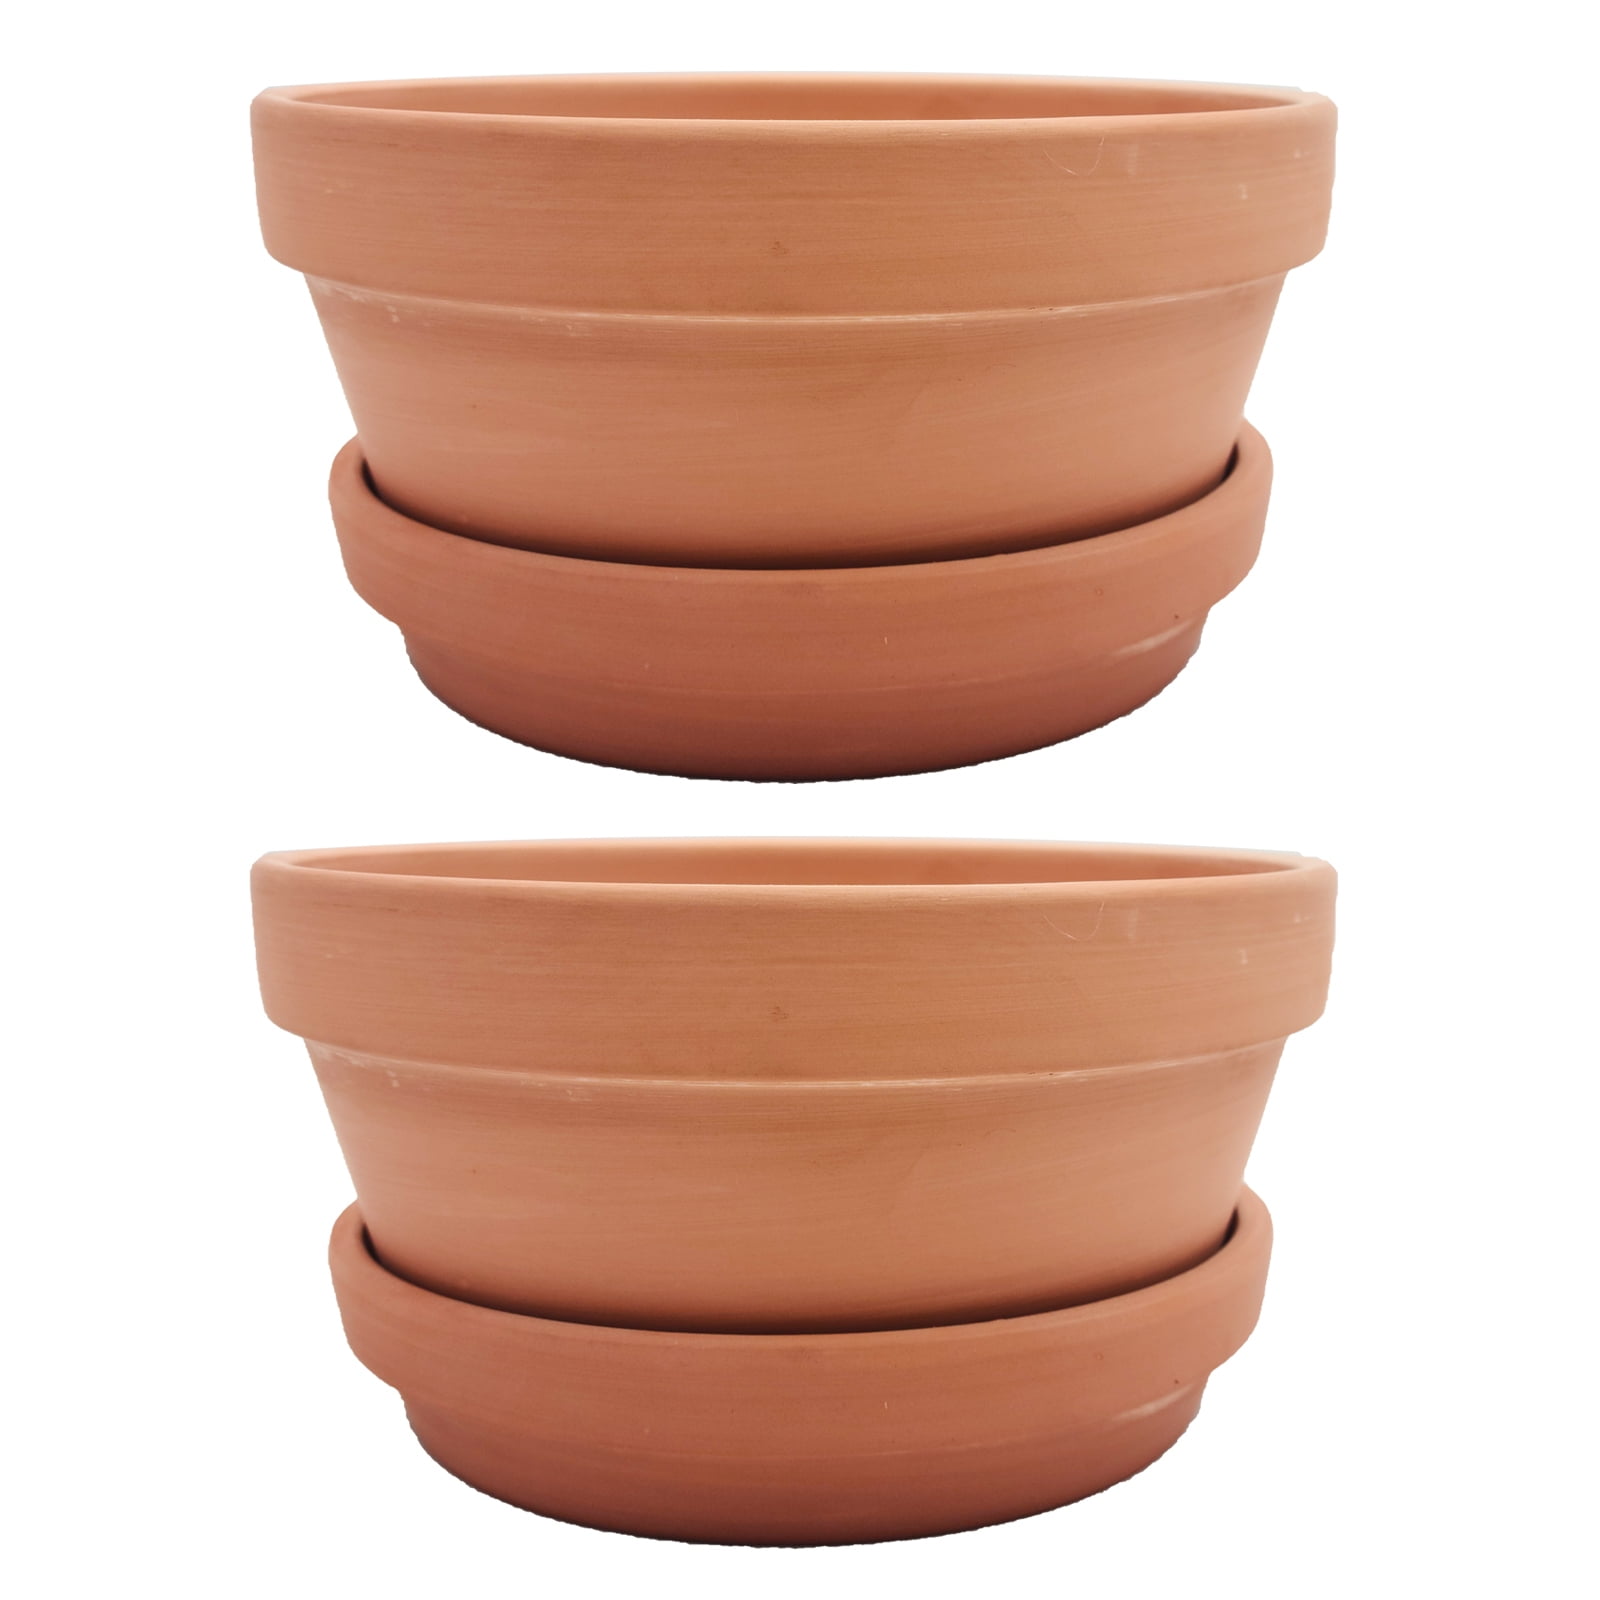 Yishang Large Terracotta pos with Drainage Hole and Saucers,Ceramic Clay Planter Pots for Indoor/Outdoor Plants,6 Inch & 7 Inch & 8 Inch,Set of 3